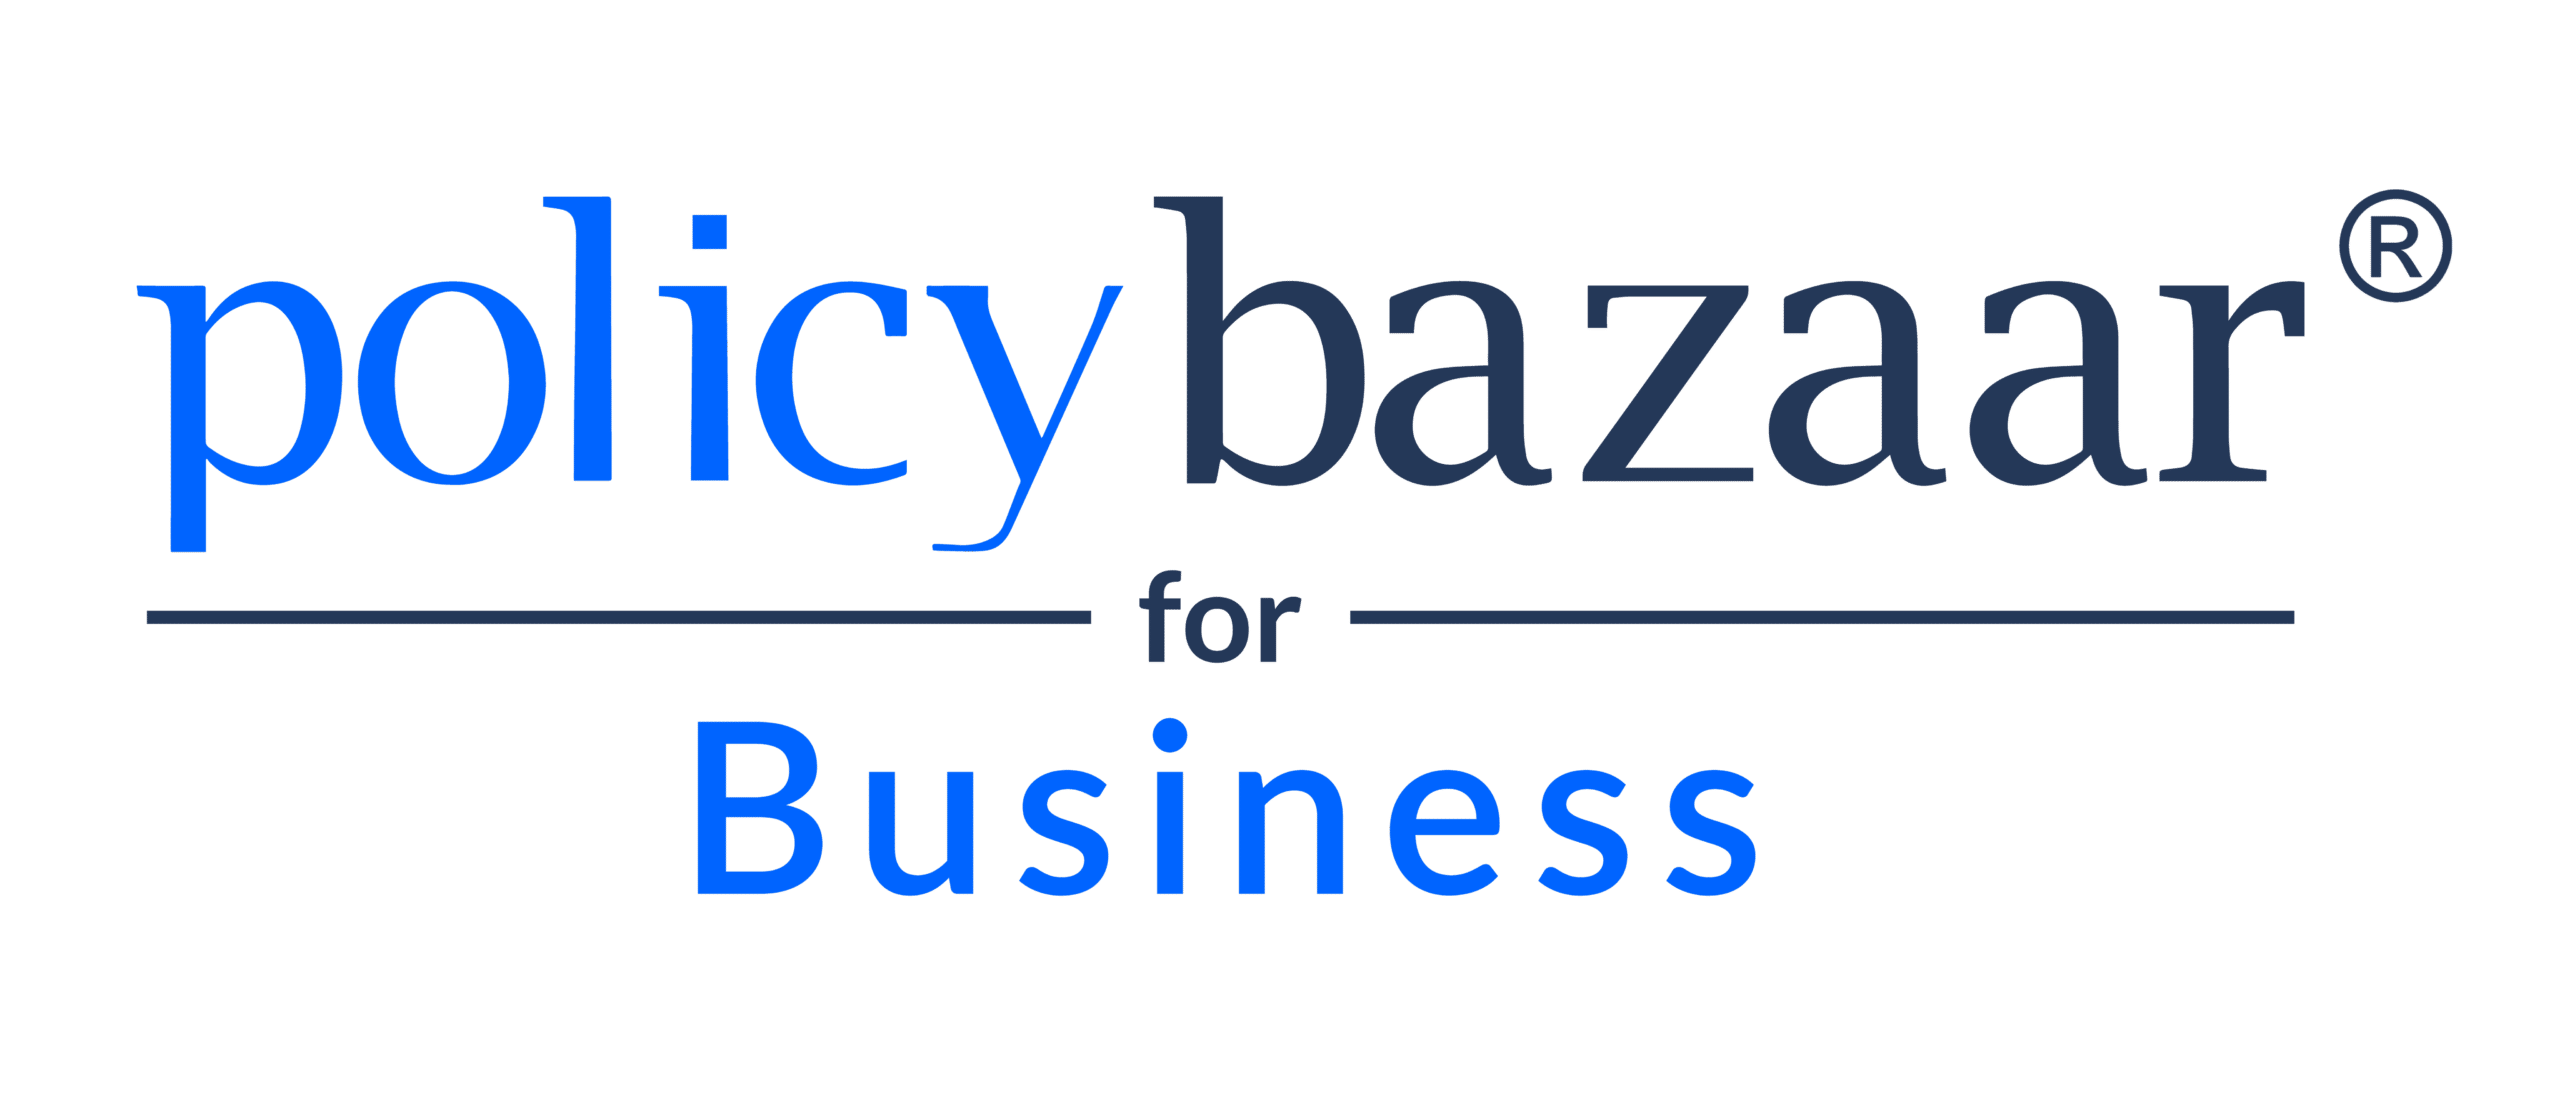 One Year since Brand Launch, Policybazaar for Business Records 40% Overall Premium Growth